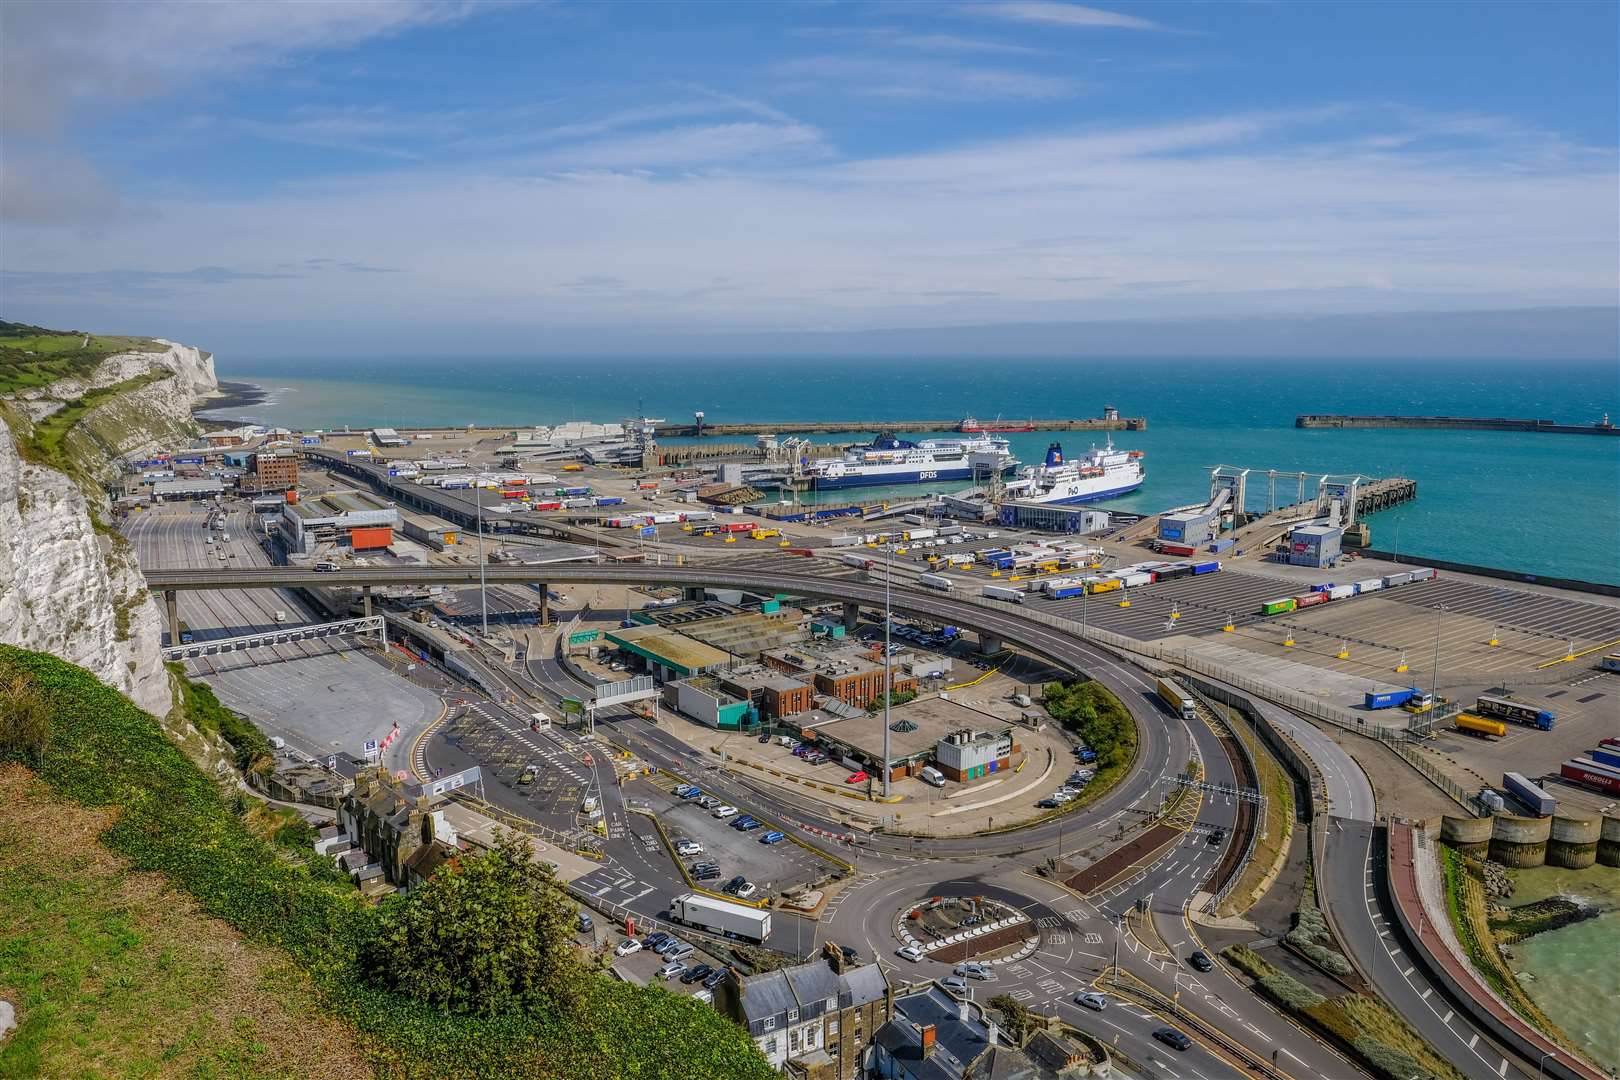 Holidaymakers may face wait times of more than 90 minutes at the Port of Dover this Easter weekend. Picture: Shutterstock